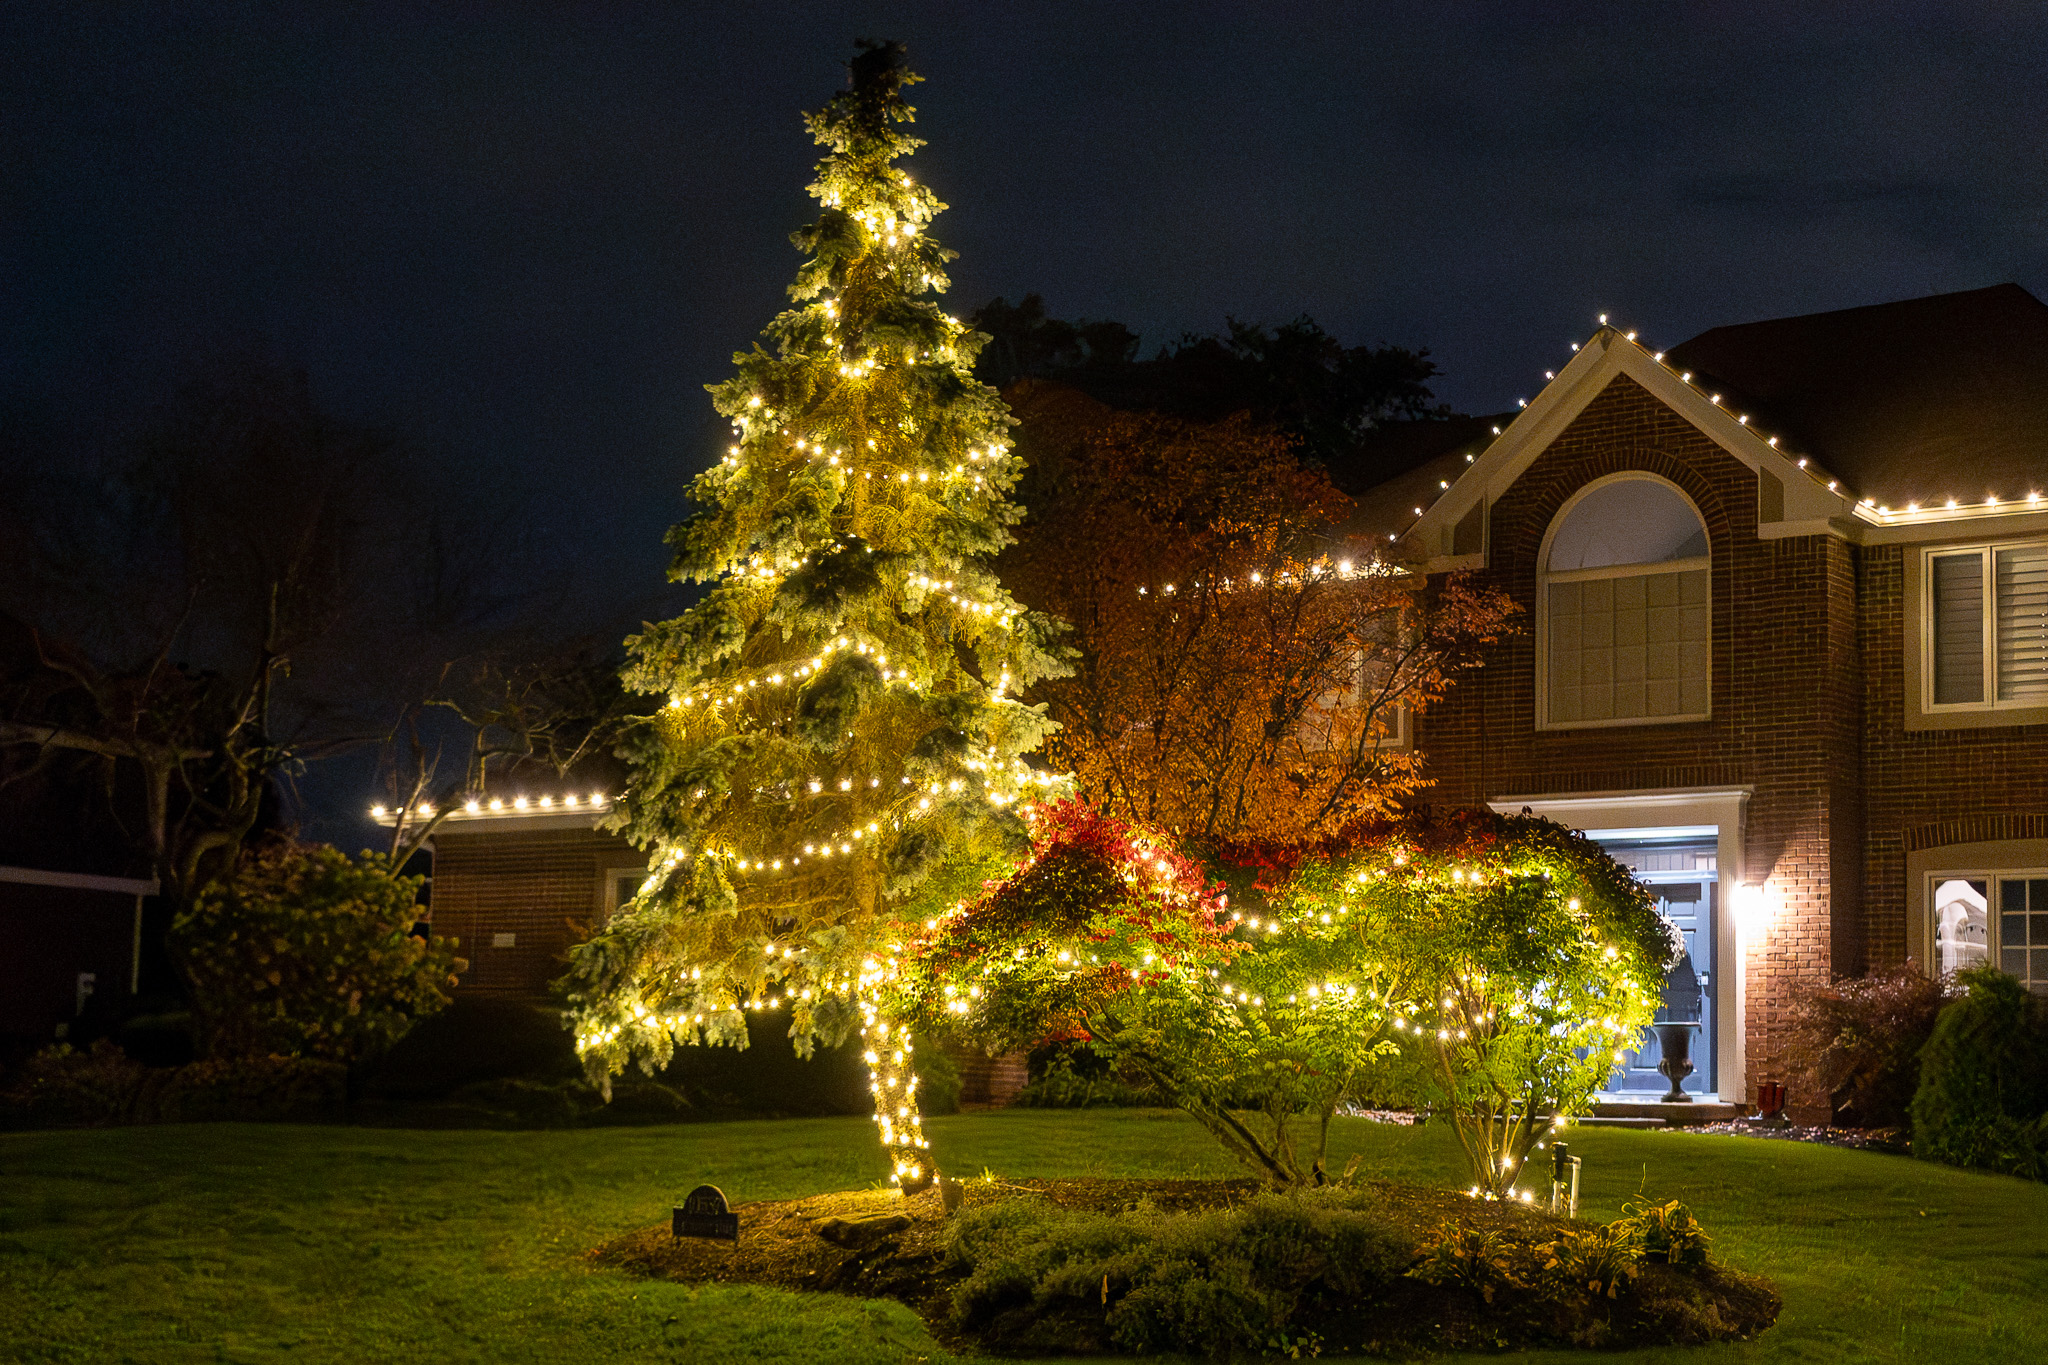 Illuminate Your Holidays with Professional Lighting Services